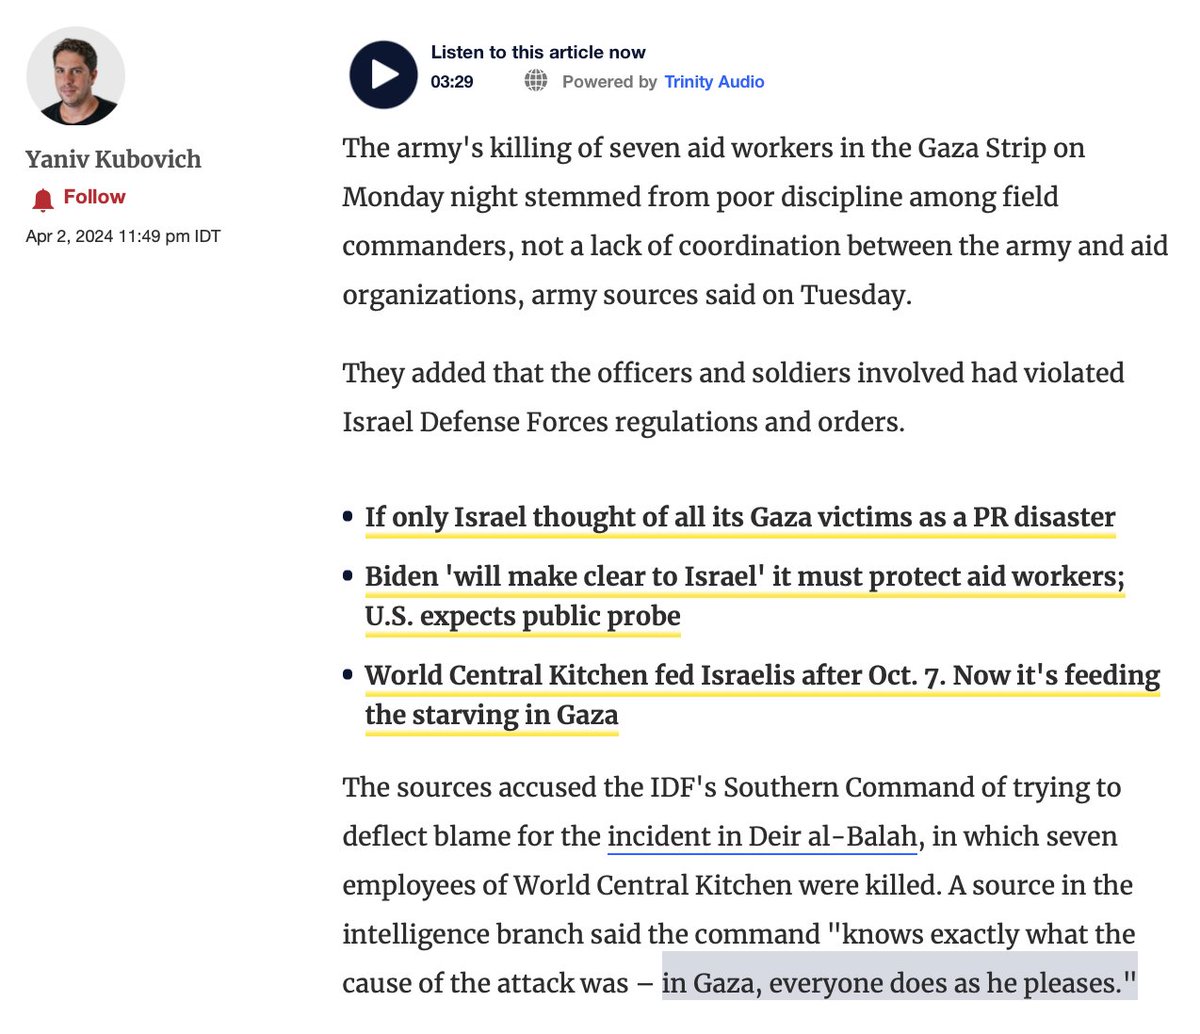 Israeli army sources say murder of @WCKitchen workers stemmed from 'poor discipline' and commanders doing 'what they want. If this is what they do to internationals from a US group backed by Israel in the open, think what they do to Palestinians when they think no one can see